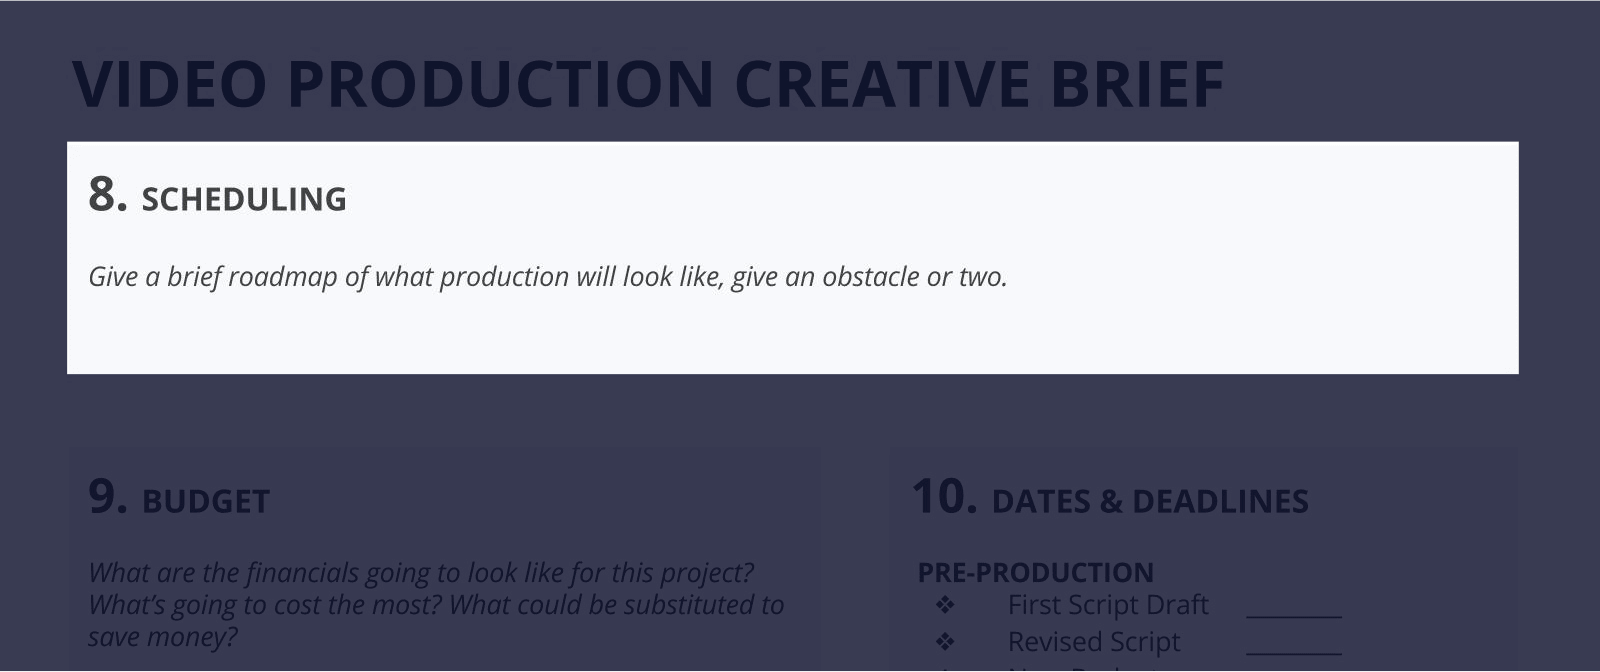 The Best Creative Brief Template For Video Agencies [Free Download] - Section 8 - Scheduling